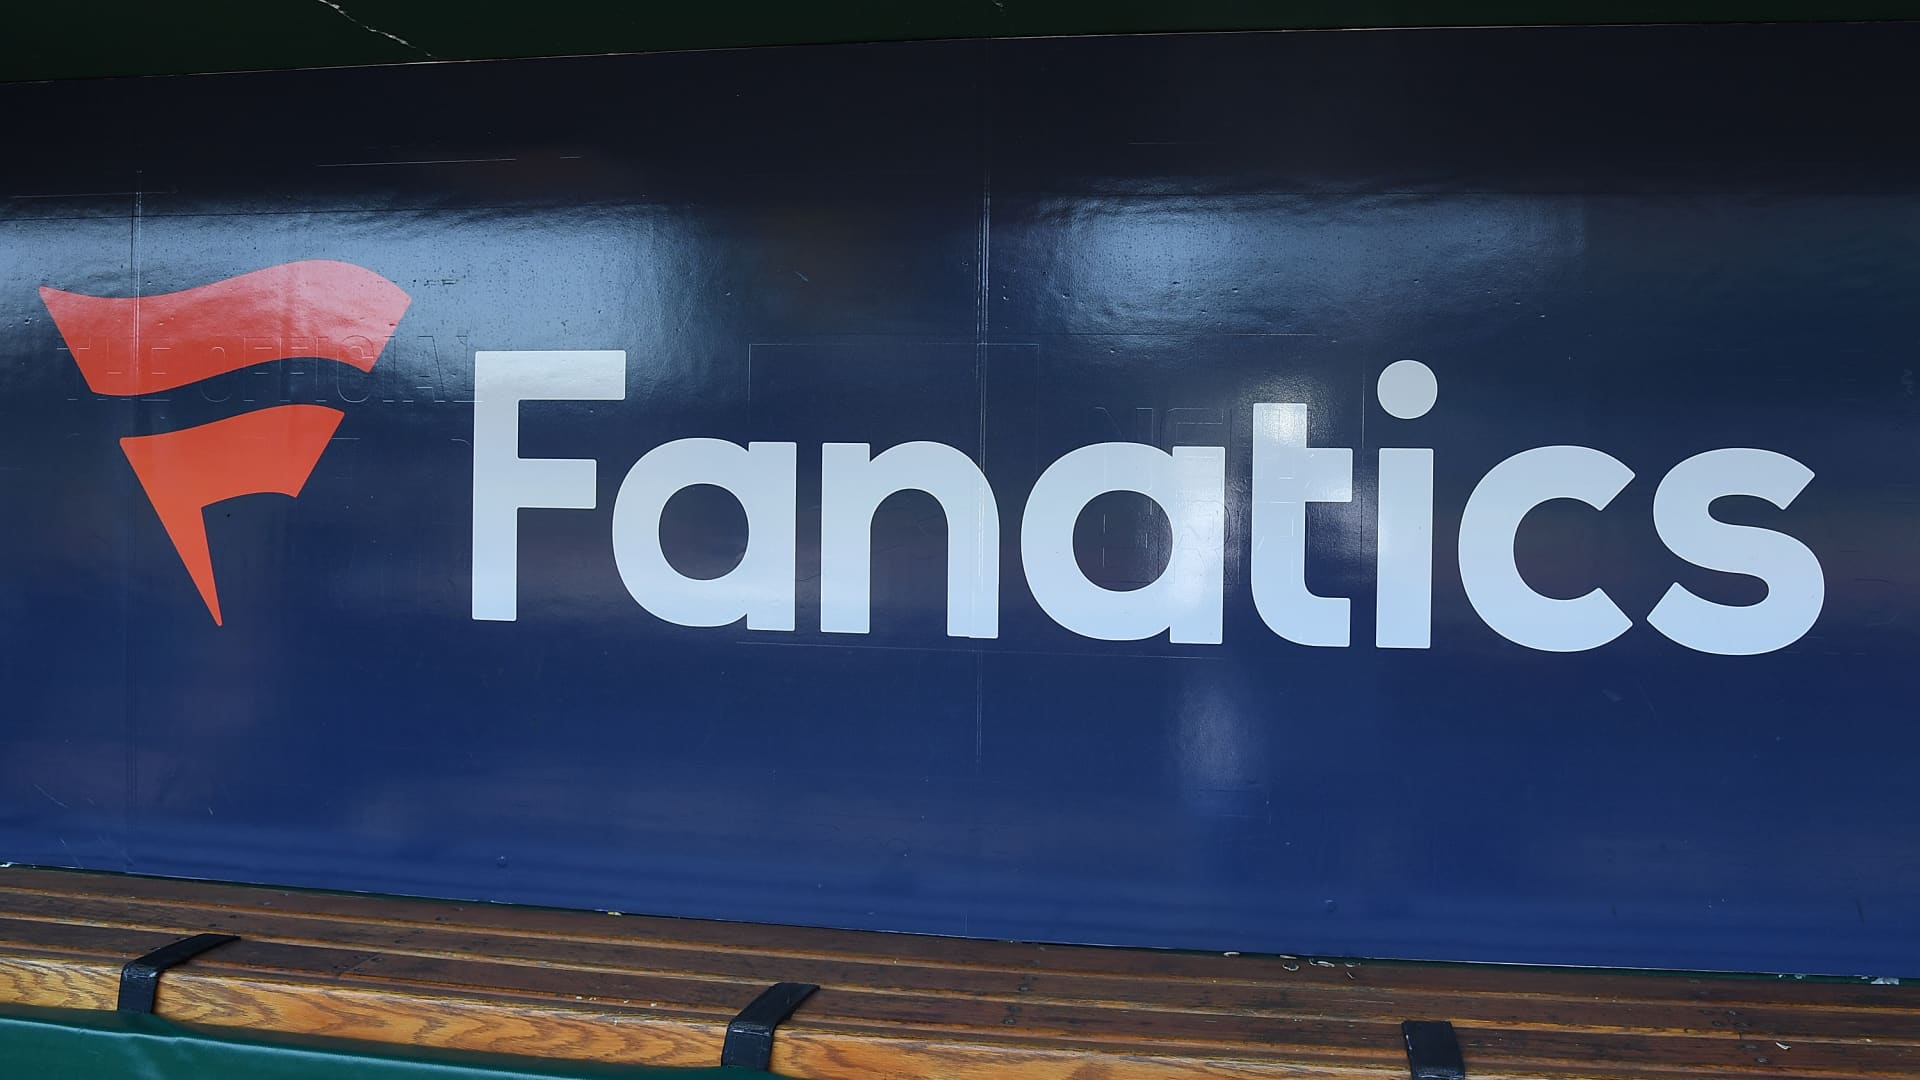 MLB All-Star Game, baseball cards, are first big test of Fanatics livestream shopping experience